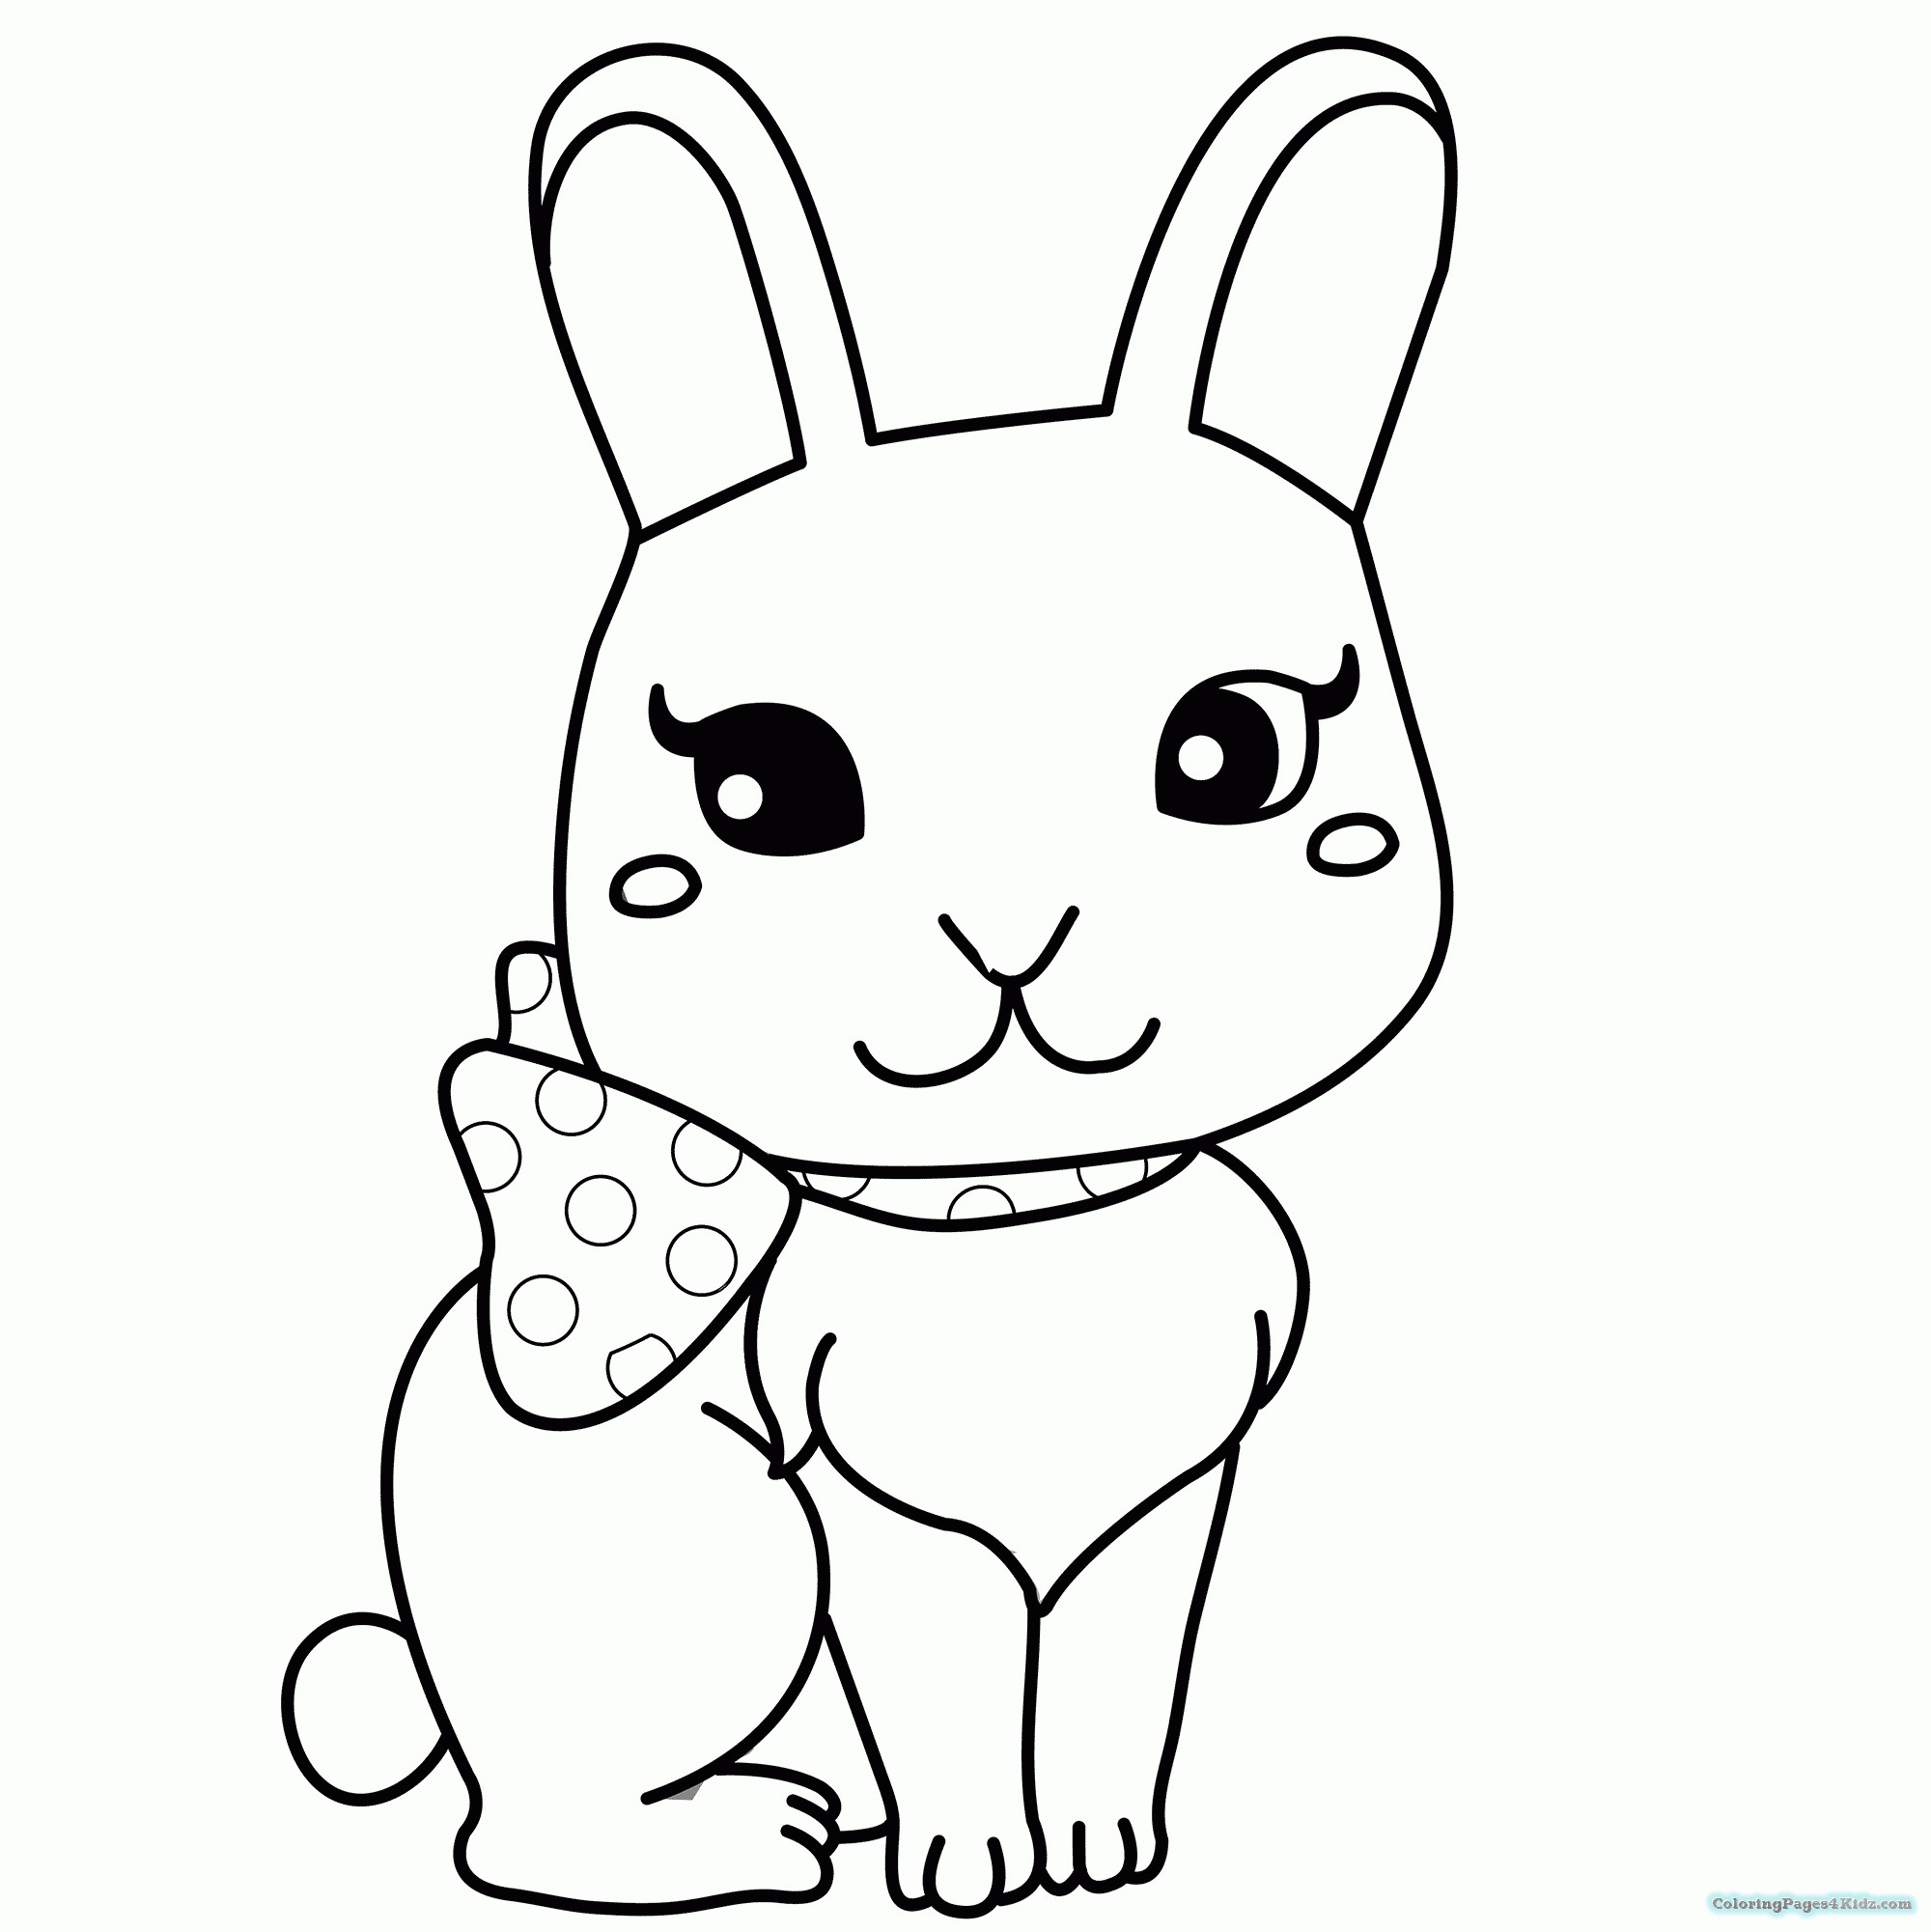 Baby Bunnies Coloring Pages
 Cute Coloring Pages Baby Bunnies